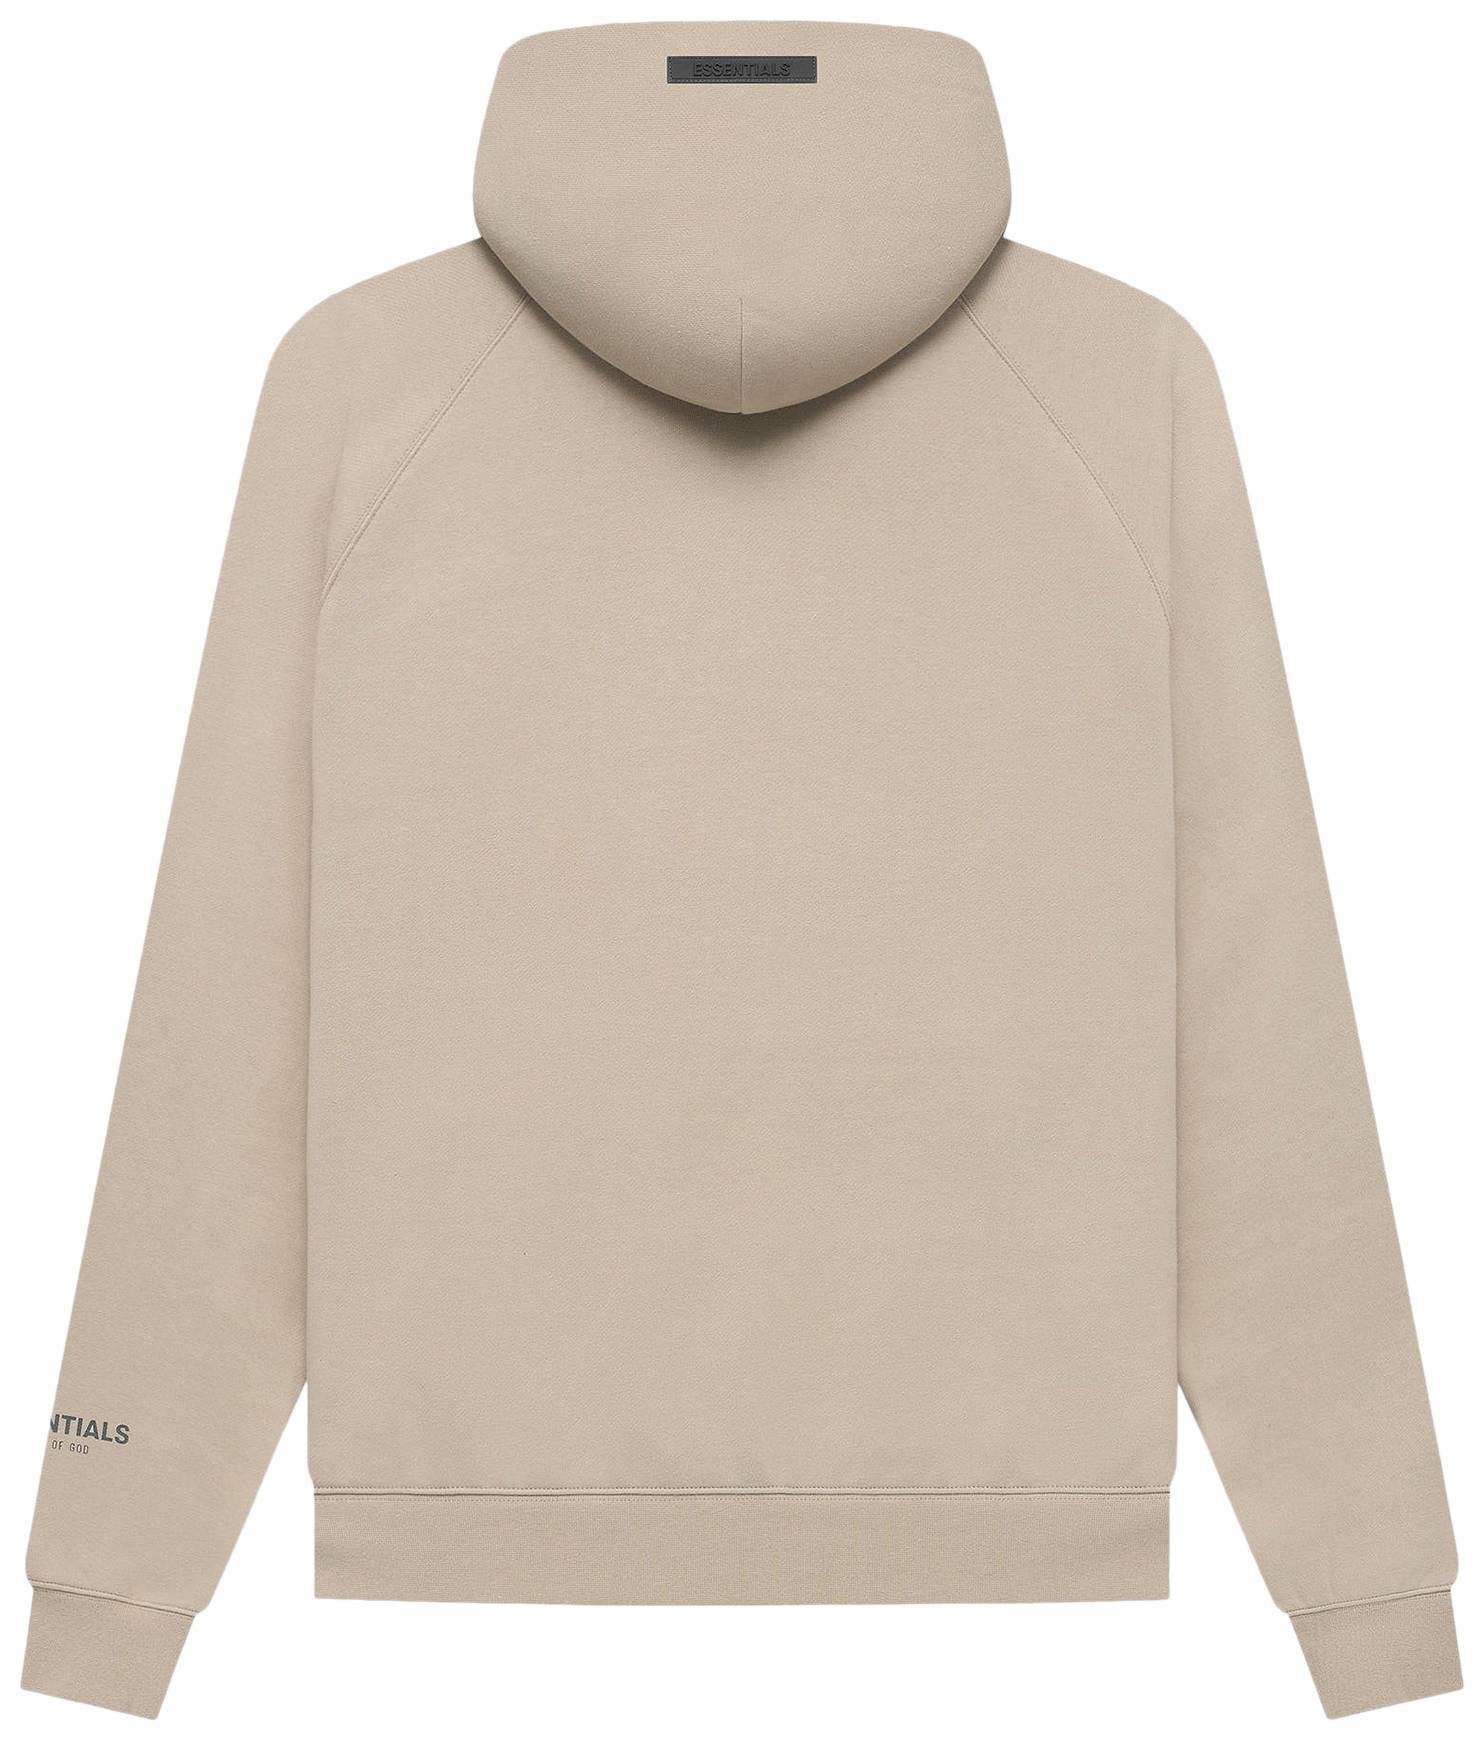 Fear of God Essentials Core Collection Pullover Hoodie String